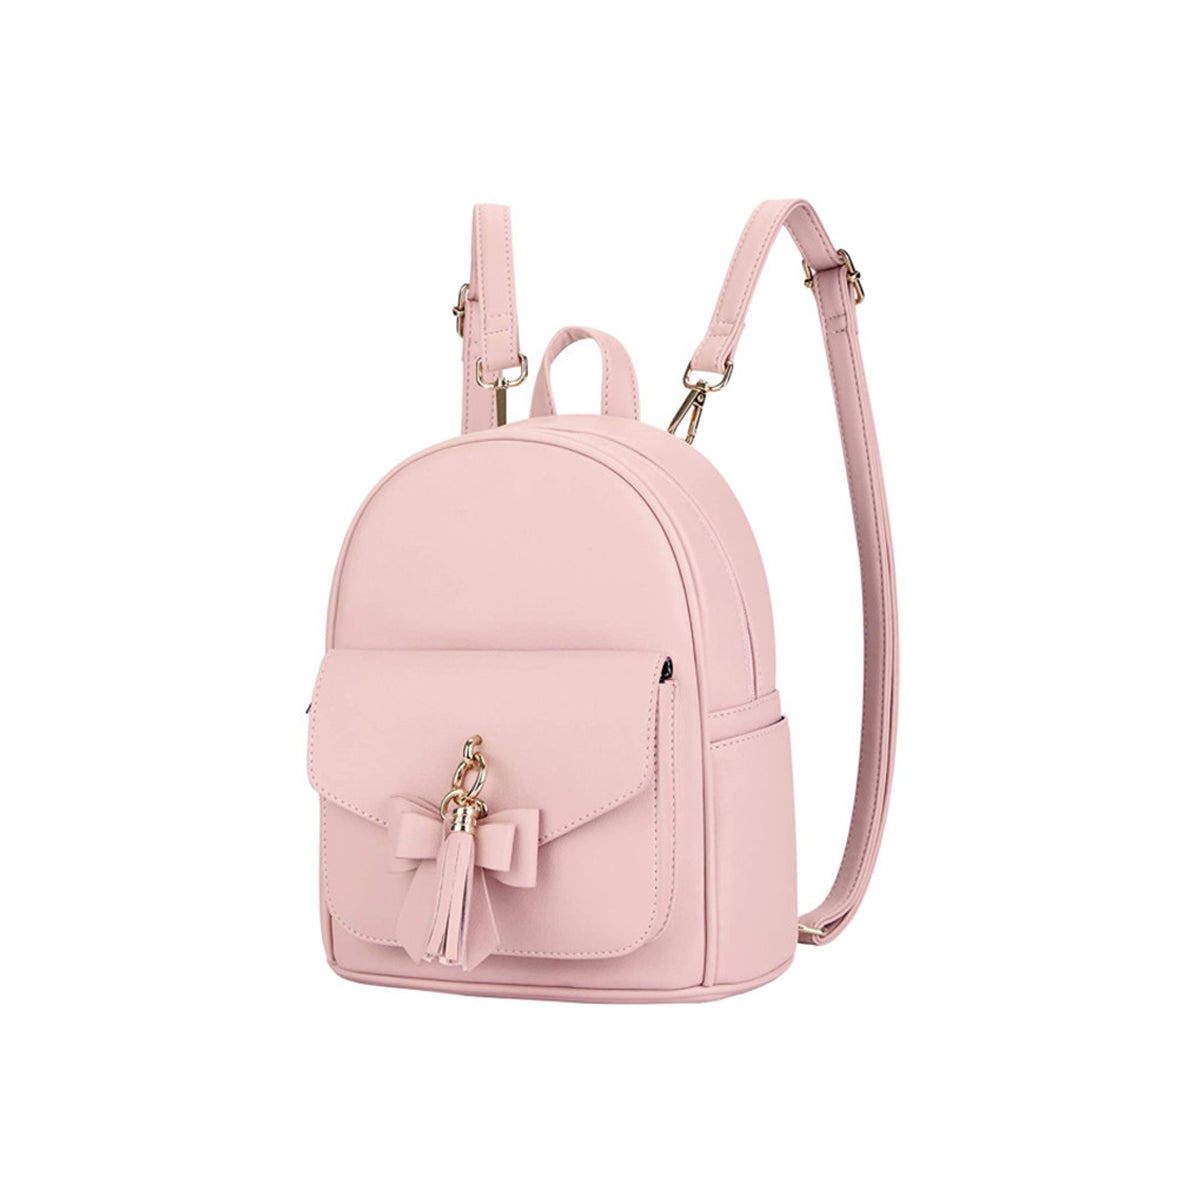 Mini Leather Backpack for Women With Charm Tassel